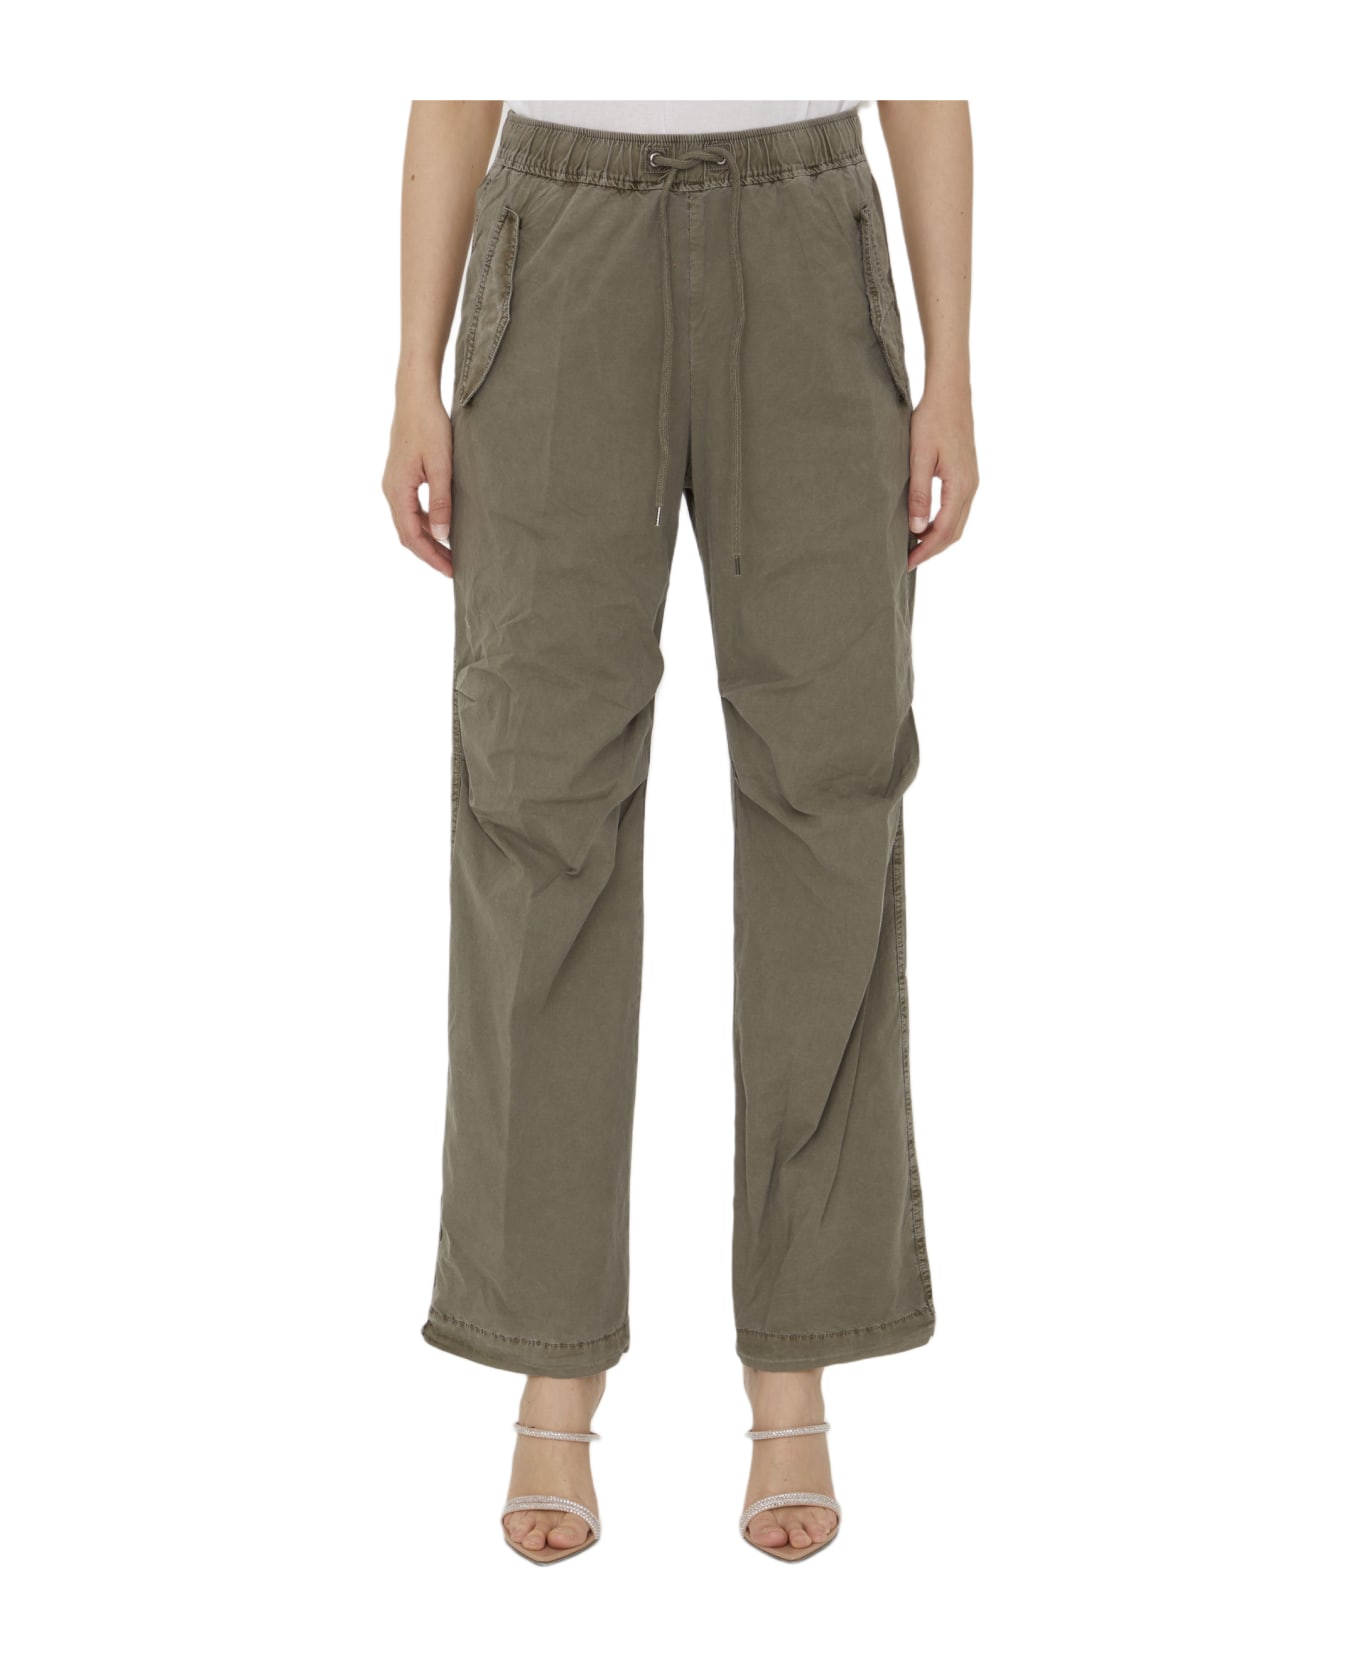 James Perse Cotton Cargo Pants - GREEN ボトムス